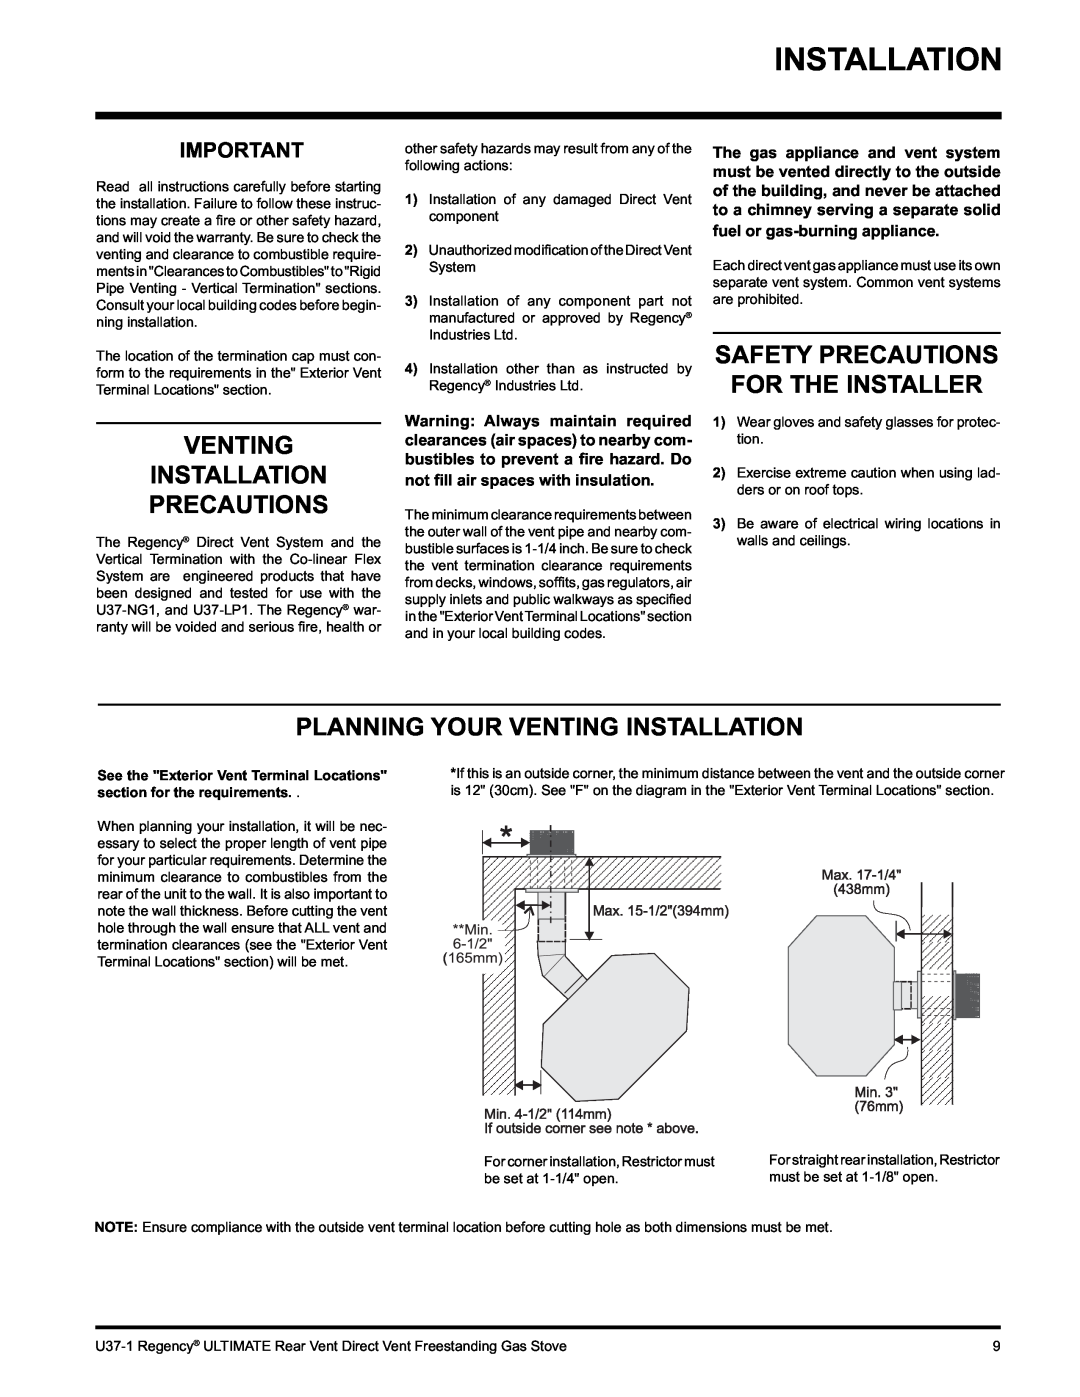 Regency U37-NG1 Venting Installation Precautions, Safety Precautions For The Installer, Planning Your Venting Installation 